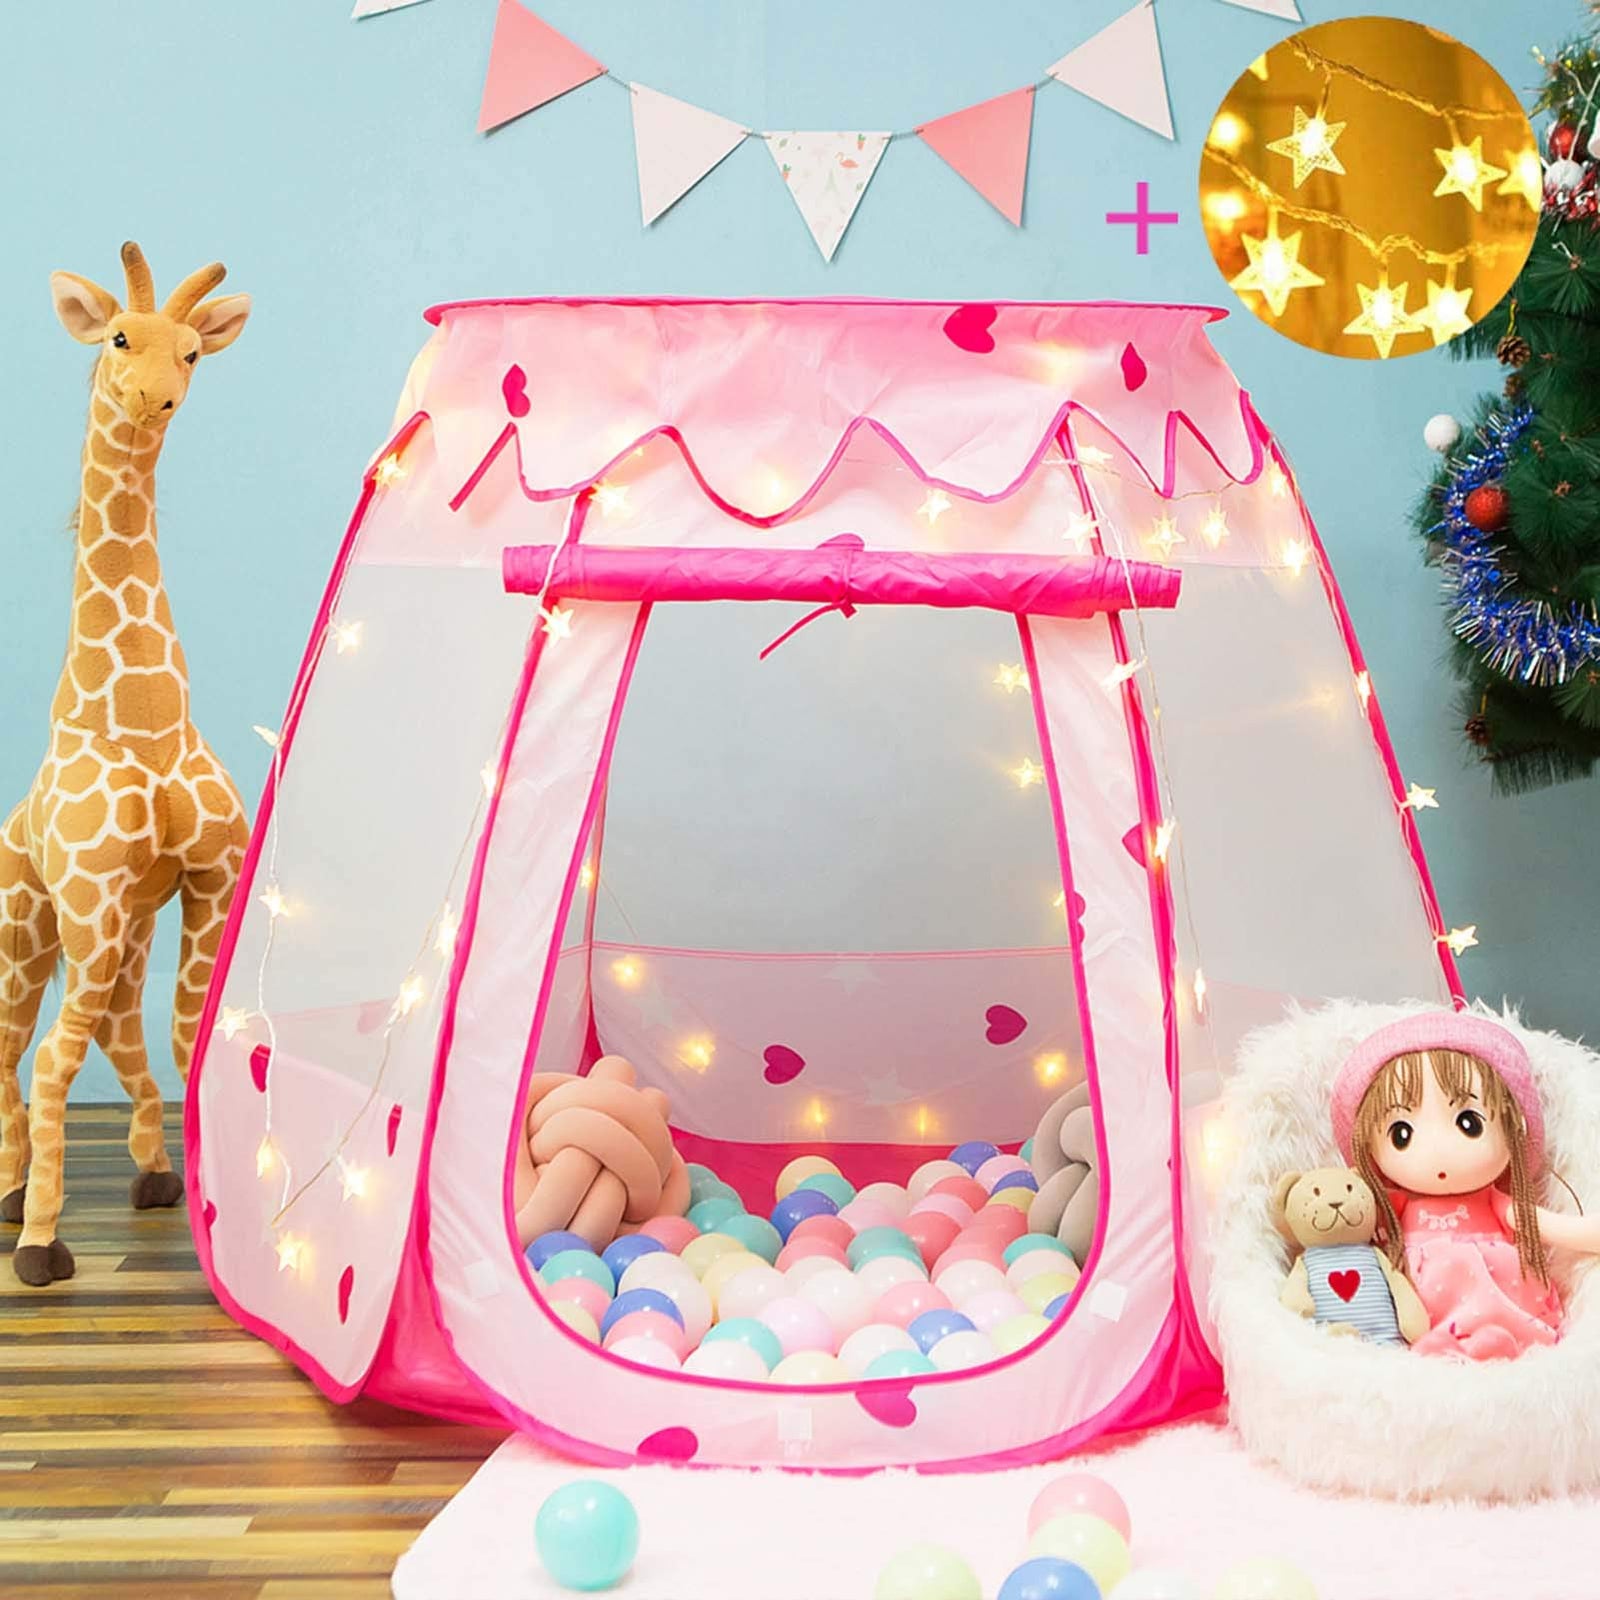 Crayline Pop Up Princess Tent with Star Light, Toys for 1 Year Old Girl Birthday Gift, Ball Pit for Toddlers Girls Toys, Easy to Pop Up and Assemble